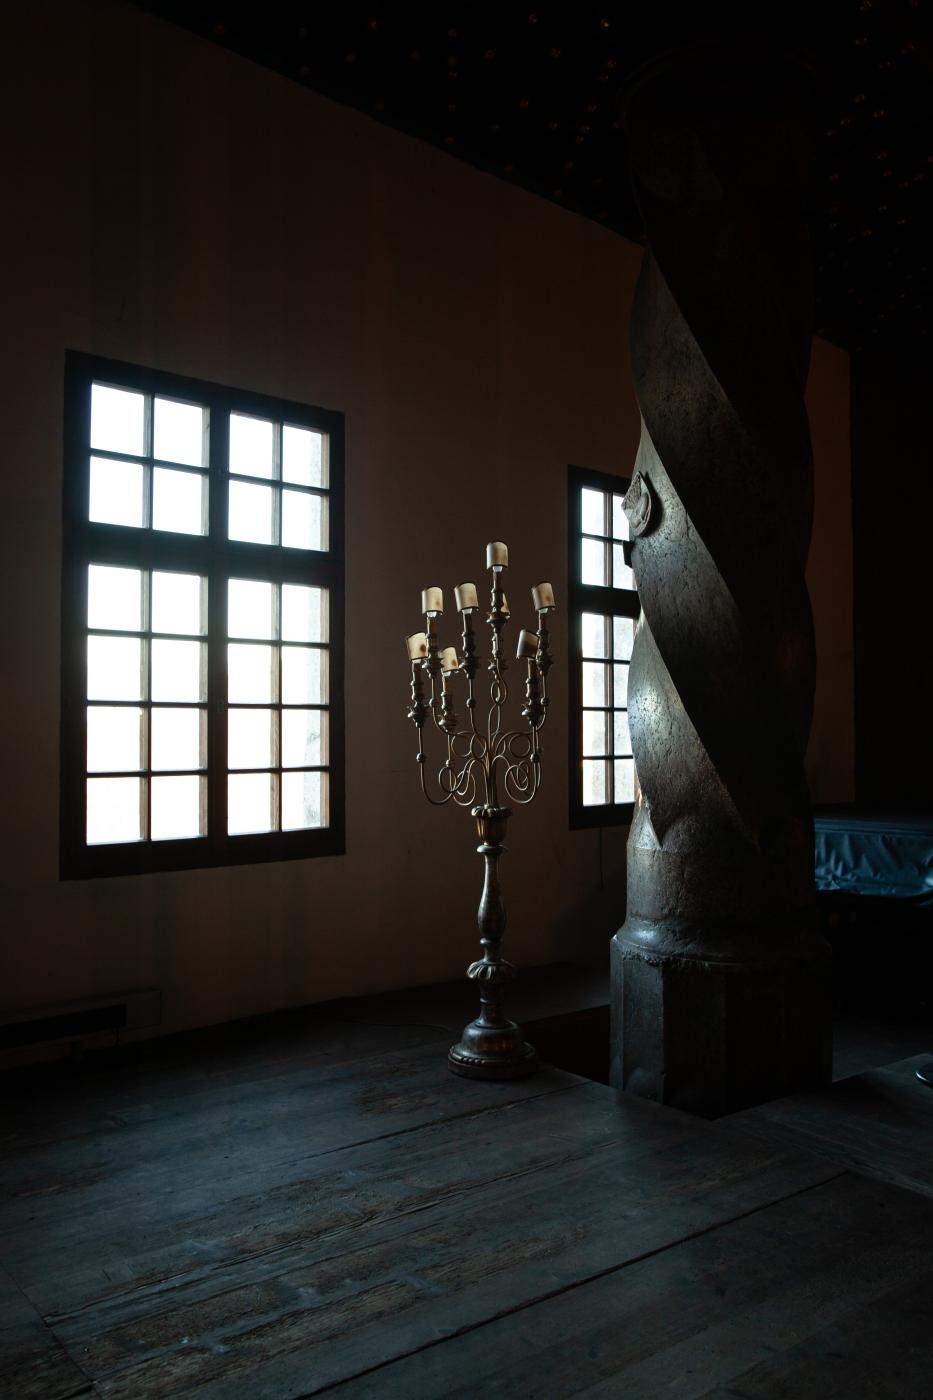 Candelabra | Buy this image